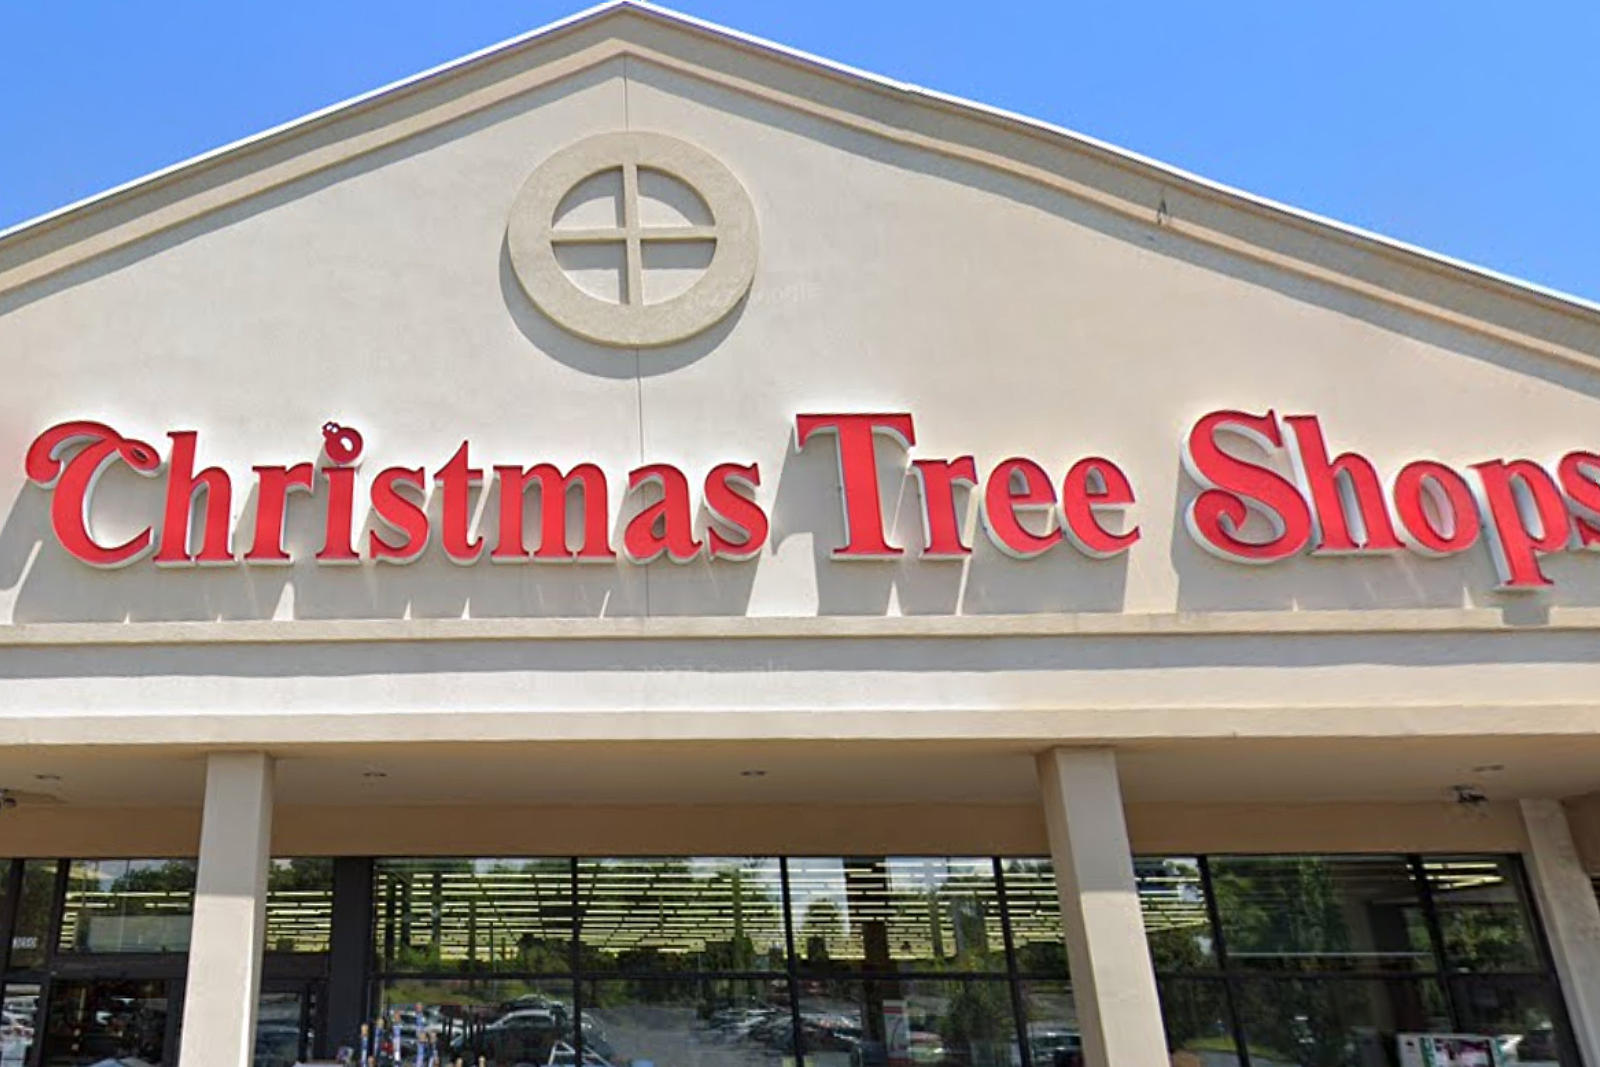 It's official. Liquidation sales now at NJ Christmas Tree Shops